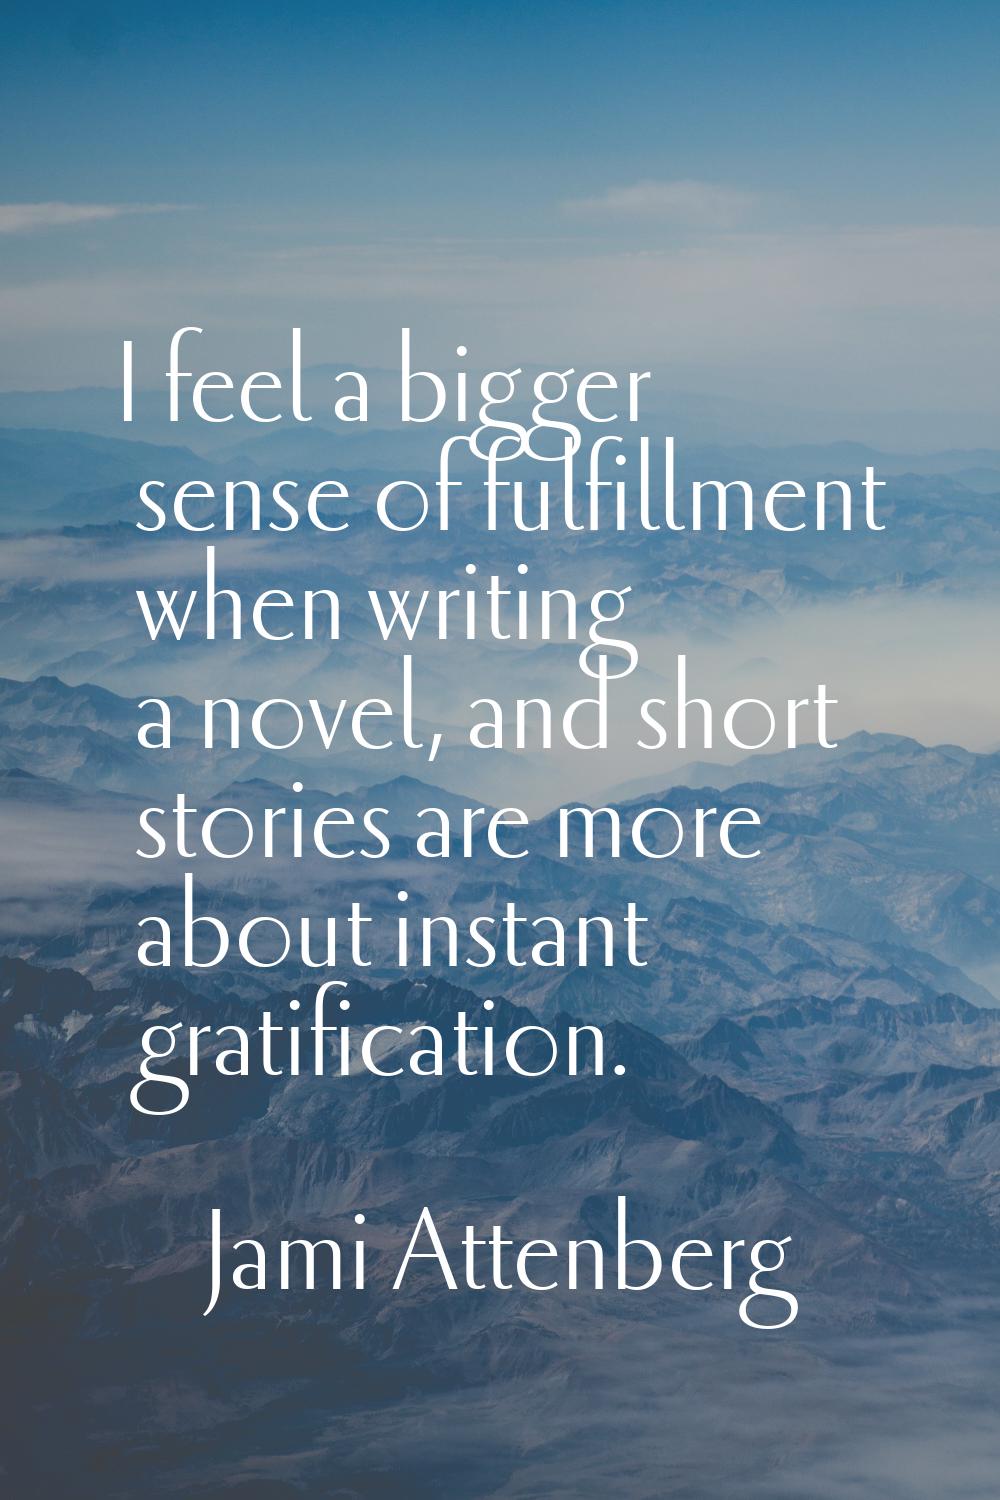 I feel a bigger sense of fulfillment when writing a novel, and short stories are more about instant